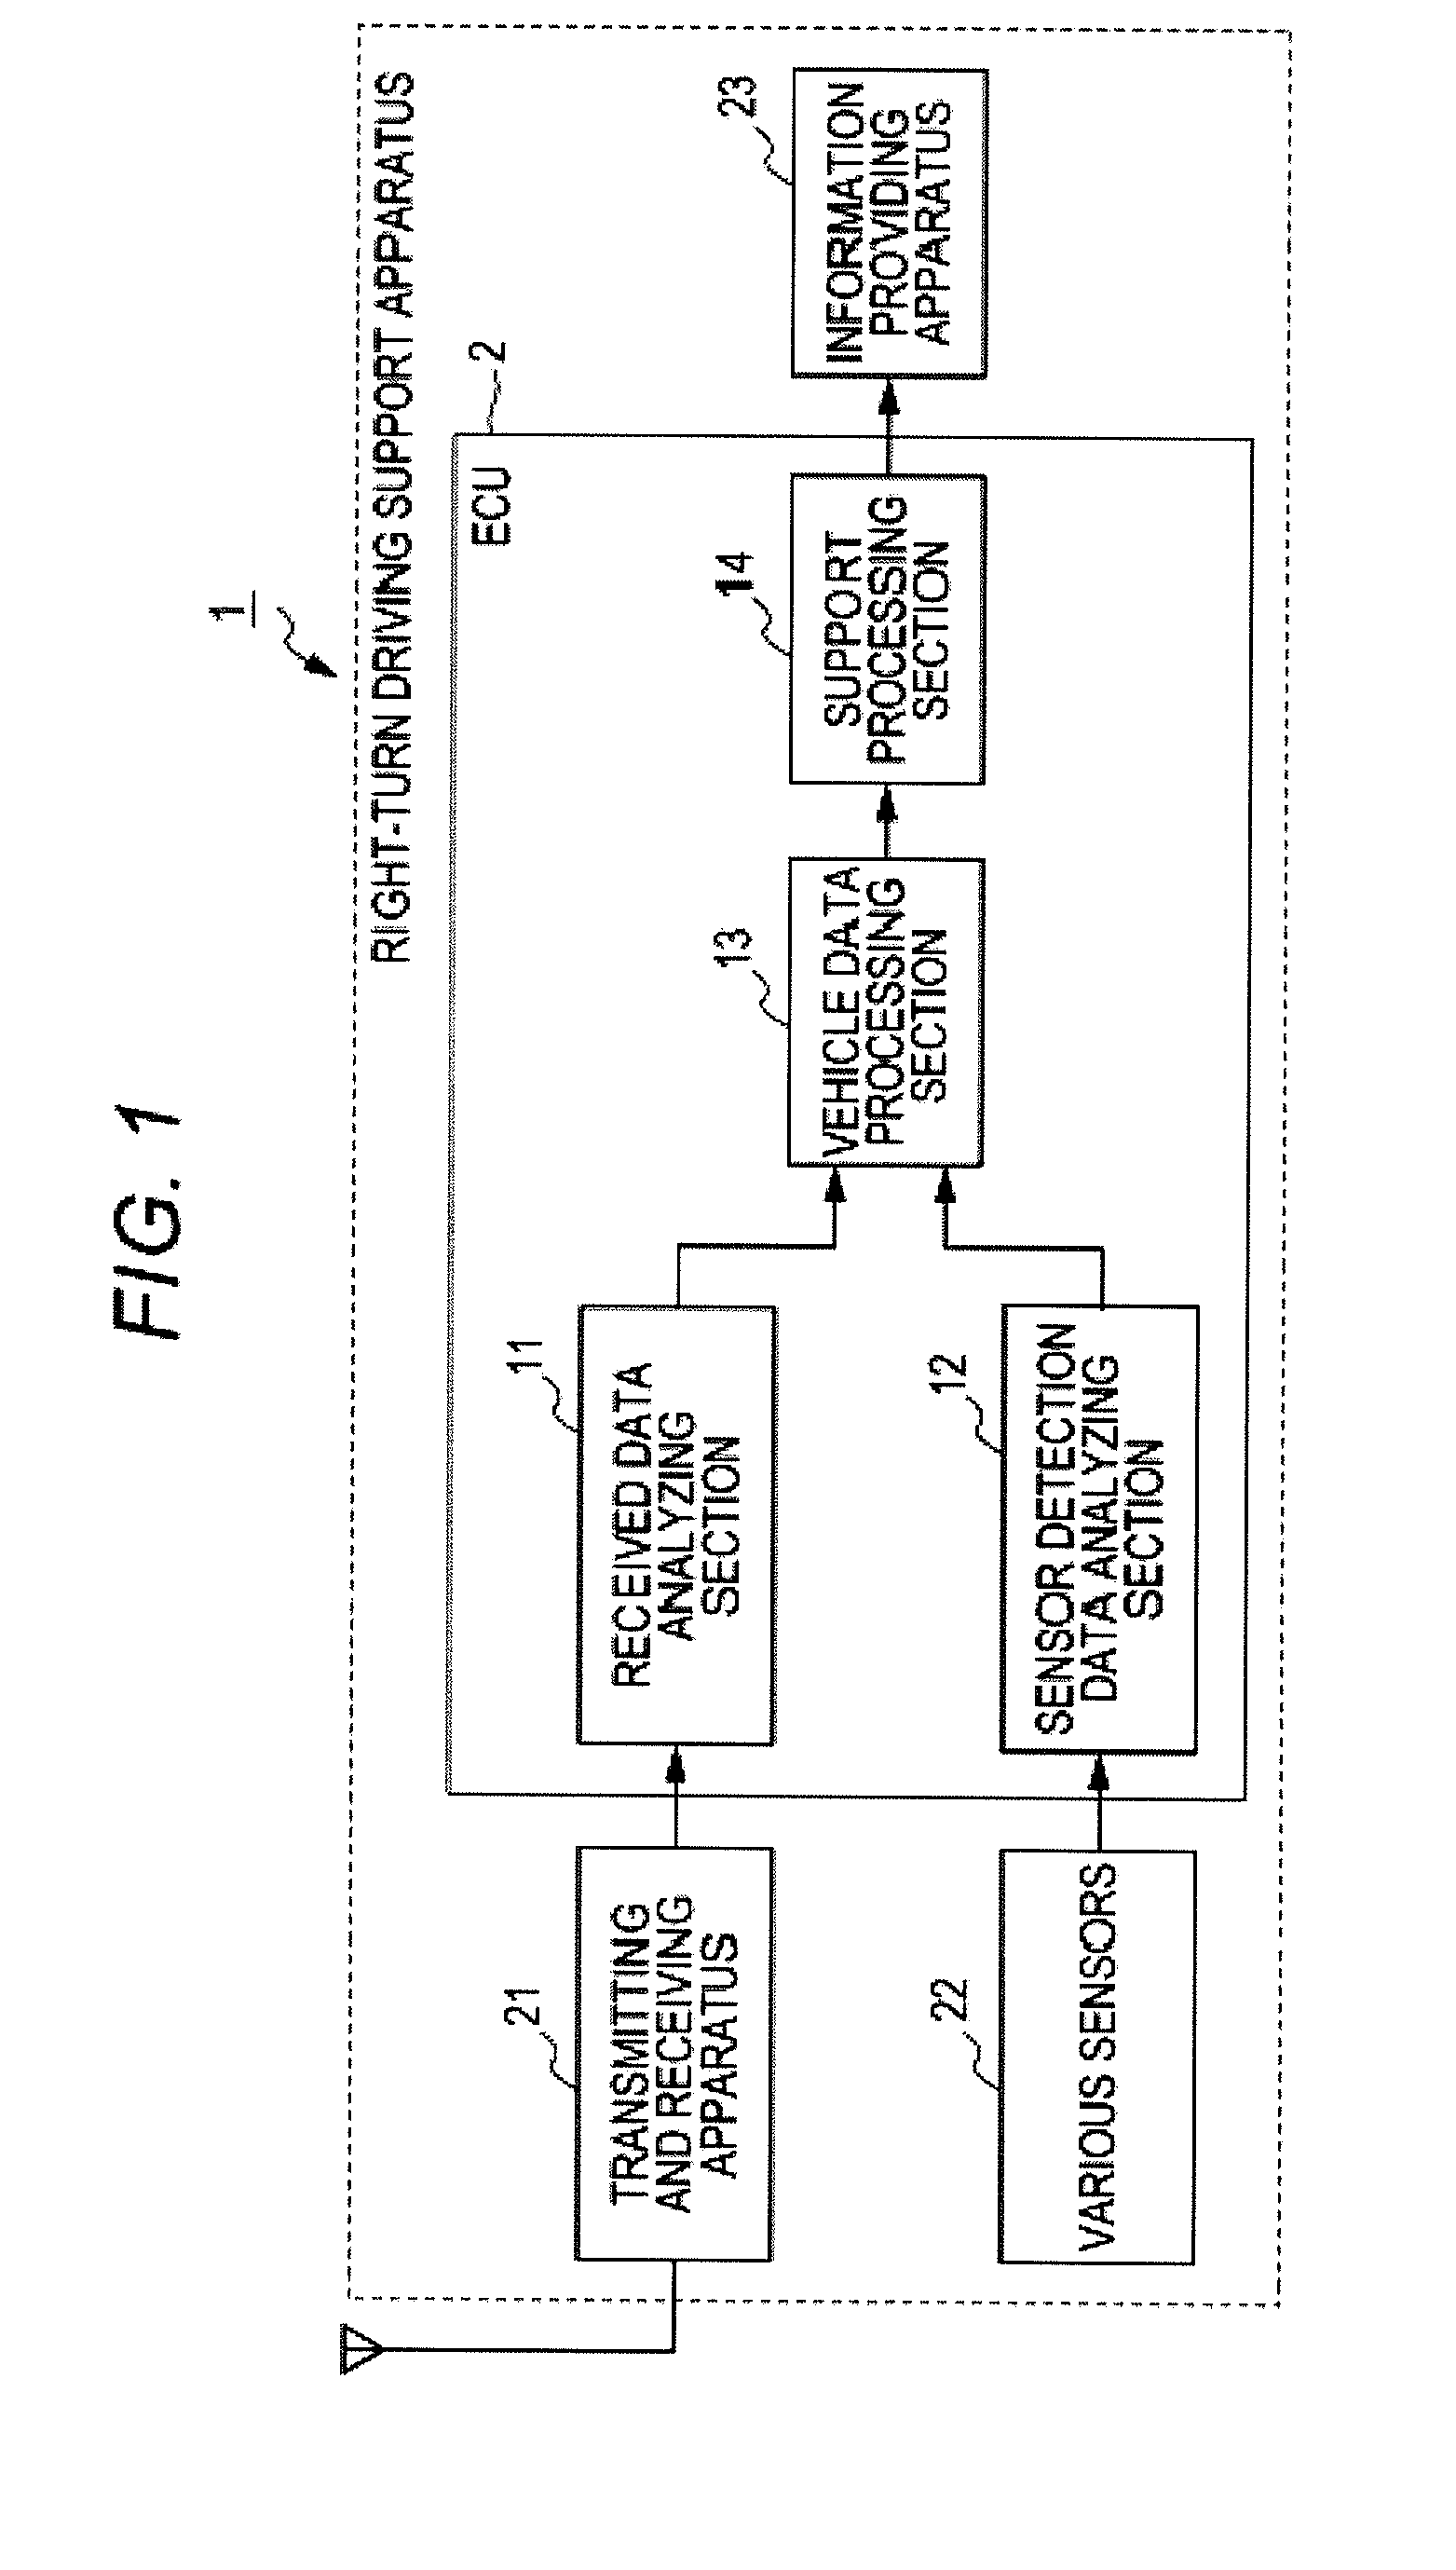 Right-turn driving support apparatus